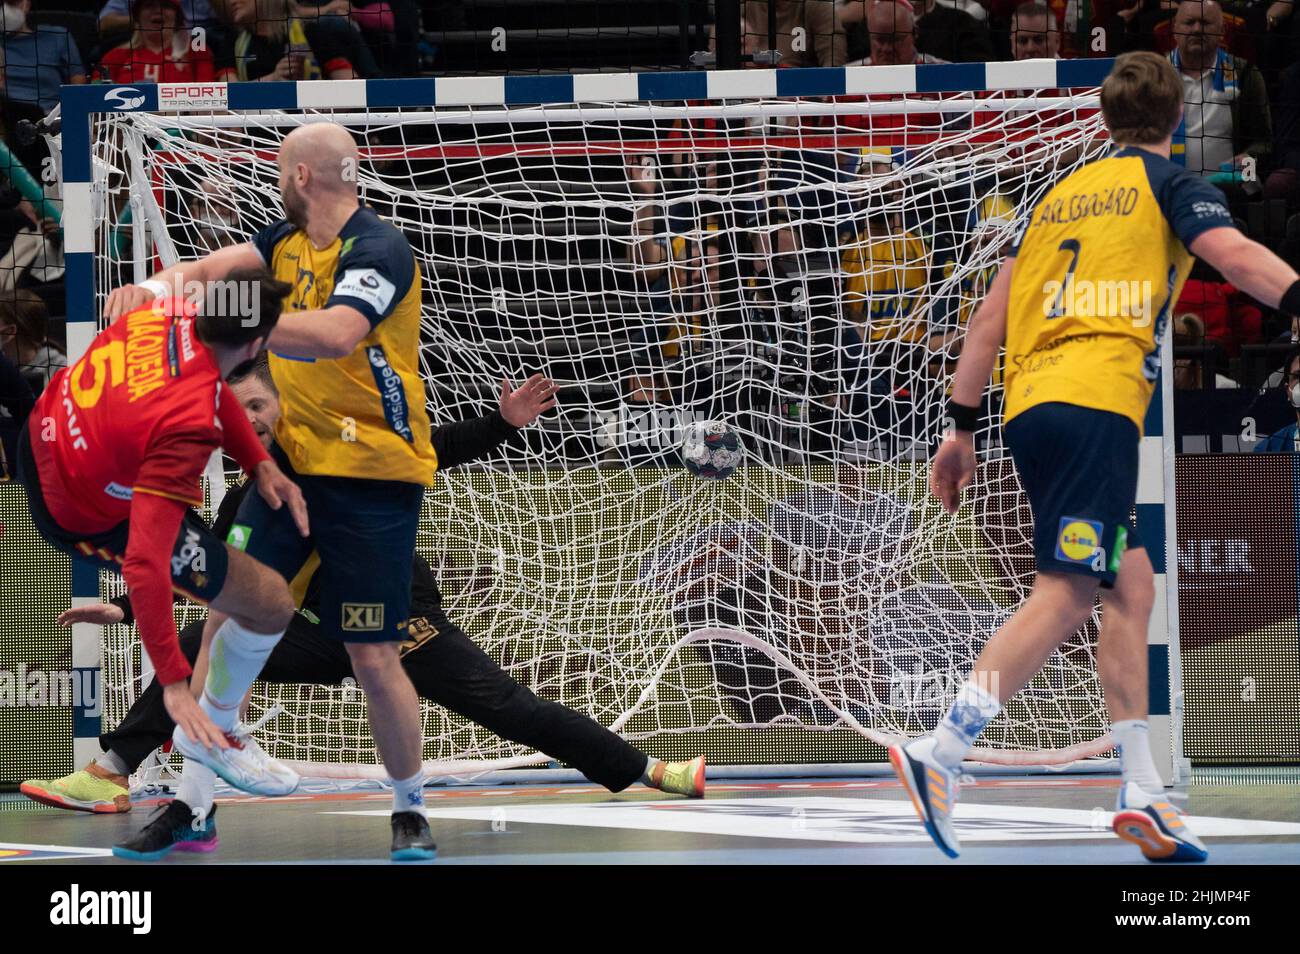 Budapest. 30th Jan, 2022. Jorge Maqueda Peno (L) of Spain scores during the men's handball EURO 2022 final match between Sweden and Spain at the MVM Dome in Budapest, Hungary on Jan. 30, 2022. Credit: Attila Volgyi/Xinhua/Alamy Live News Stock Photo